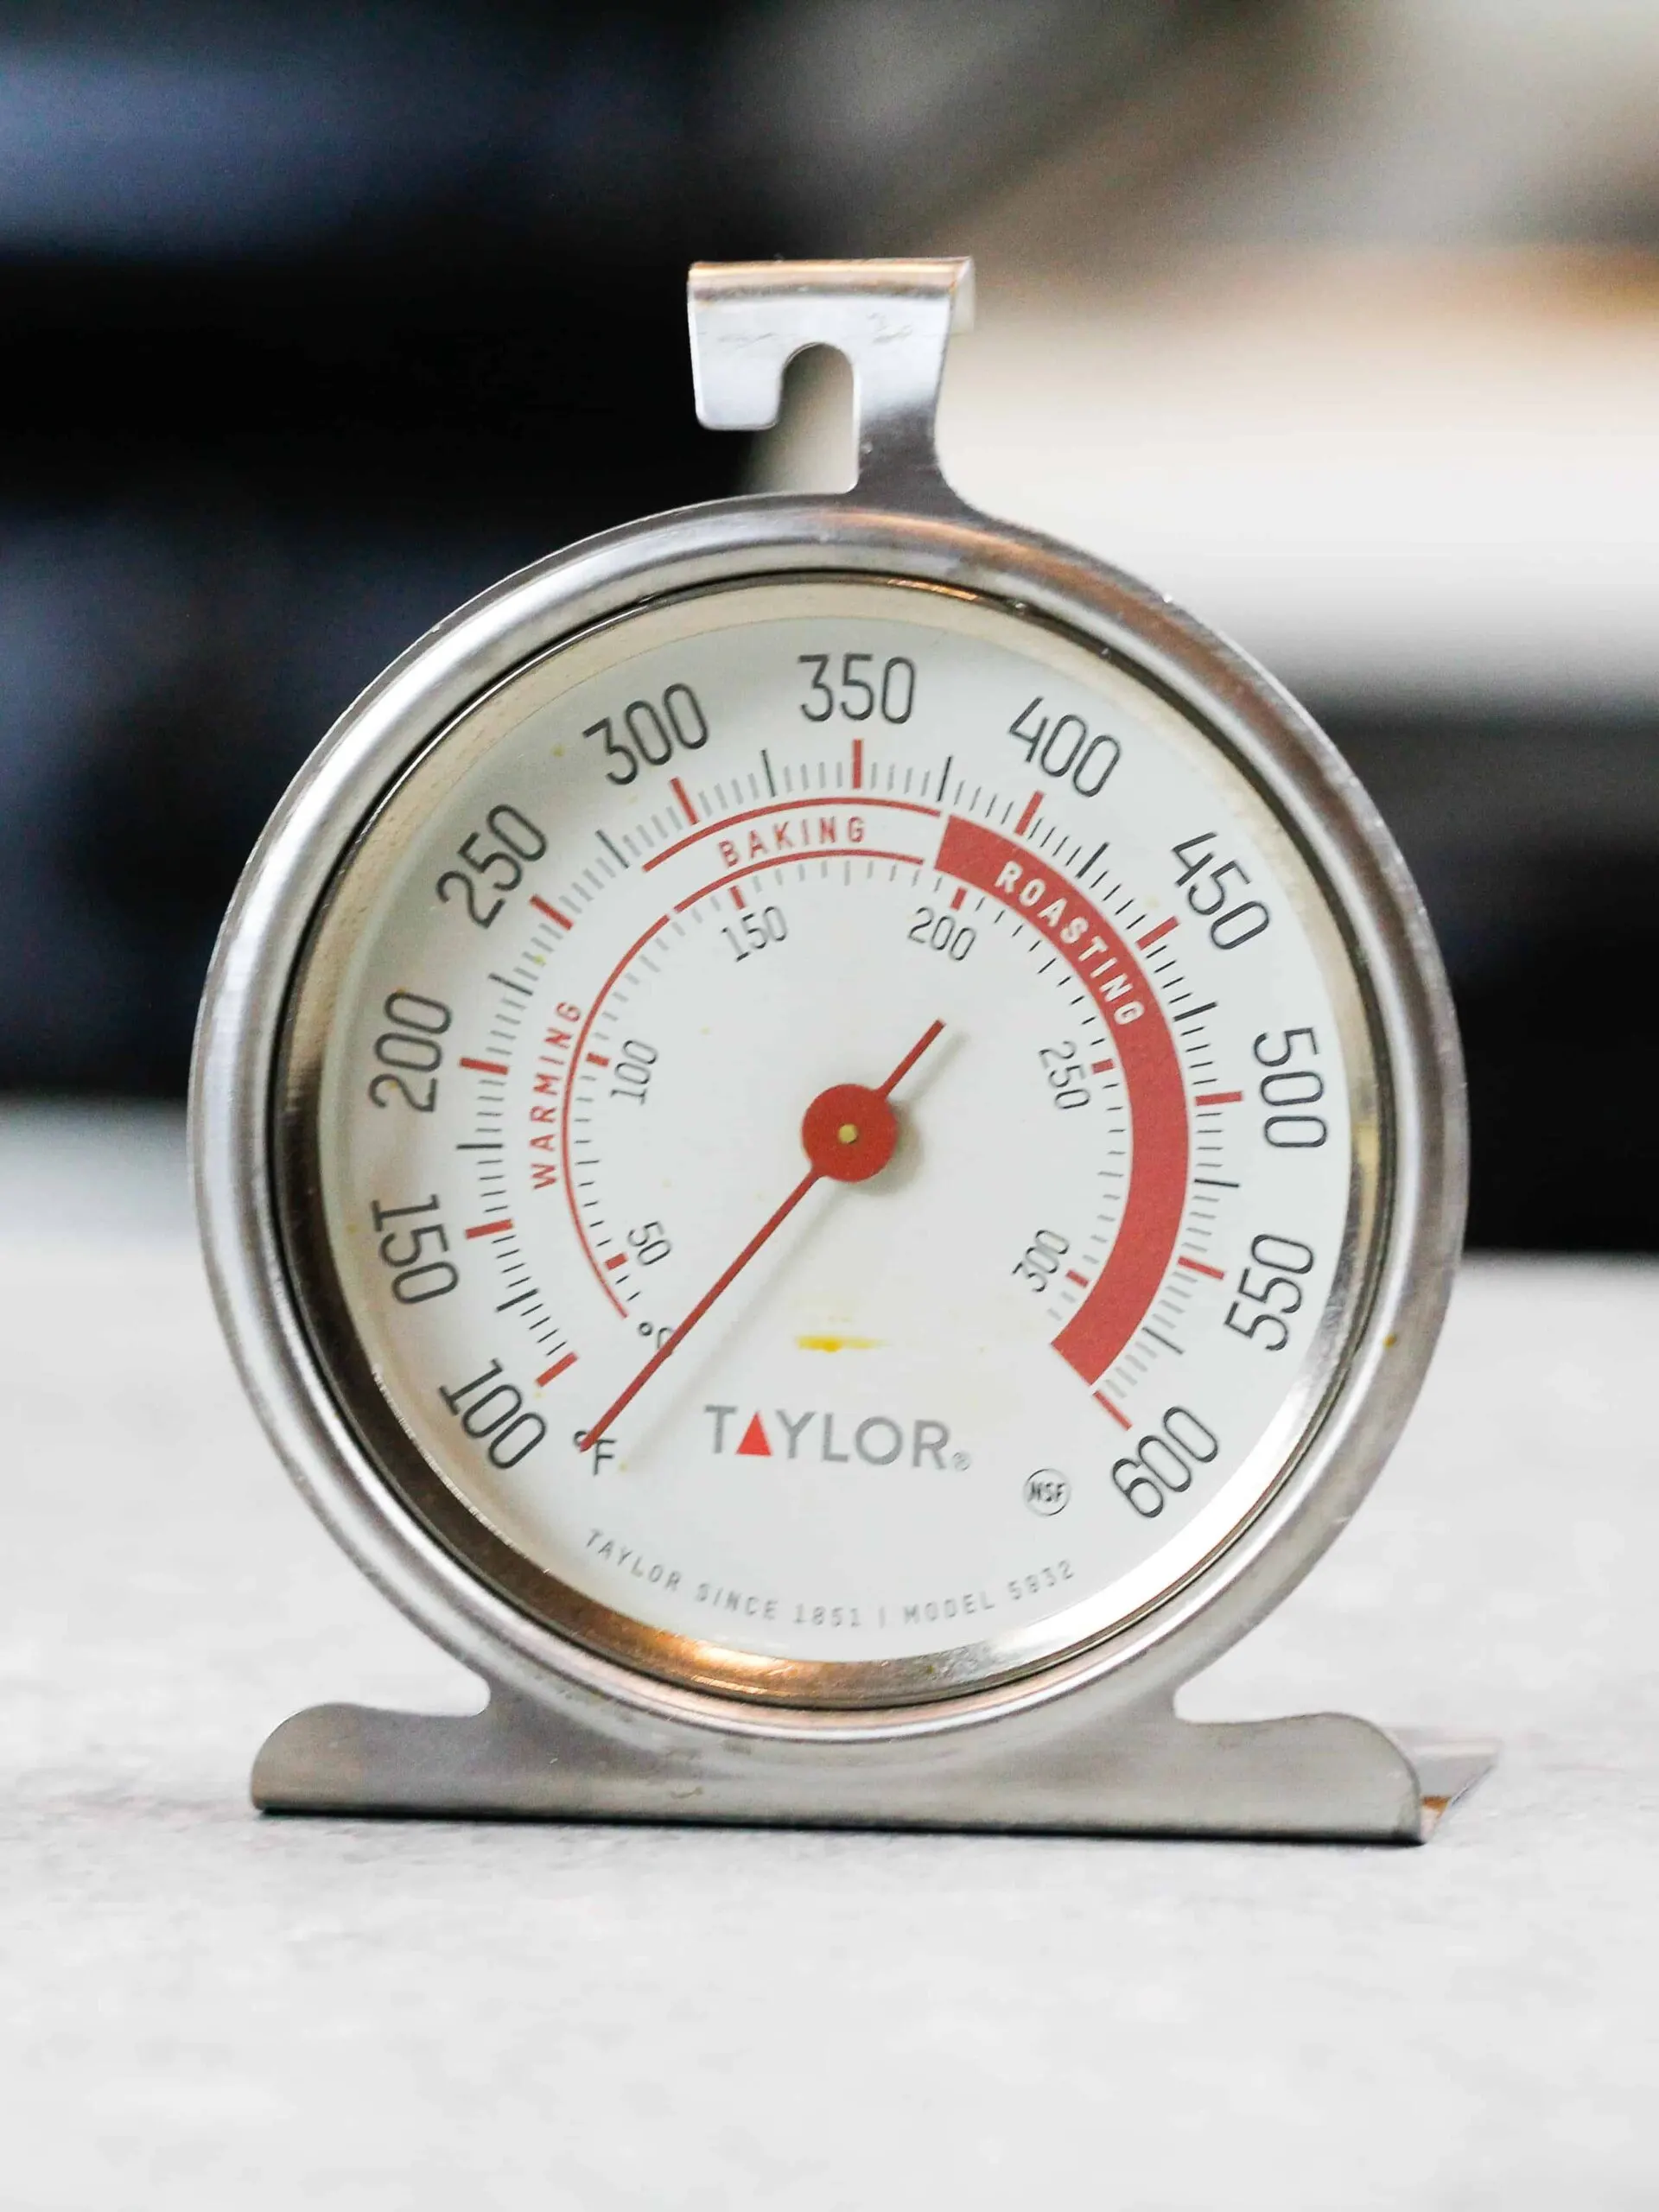 image of an oven thermometer being used to make sure an oven bakes accurately